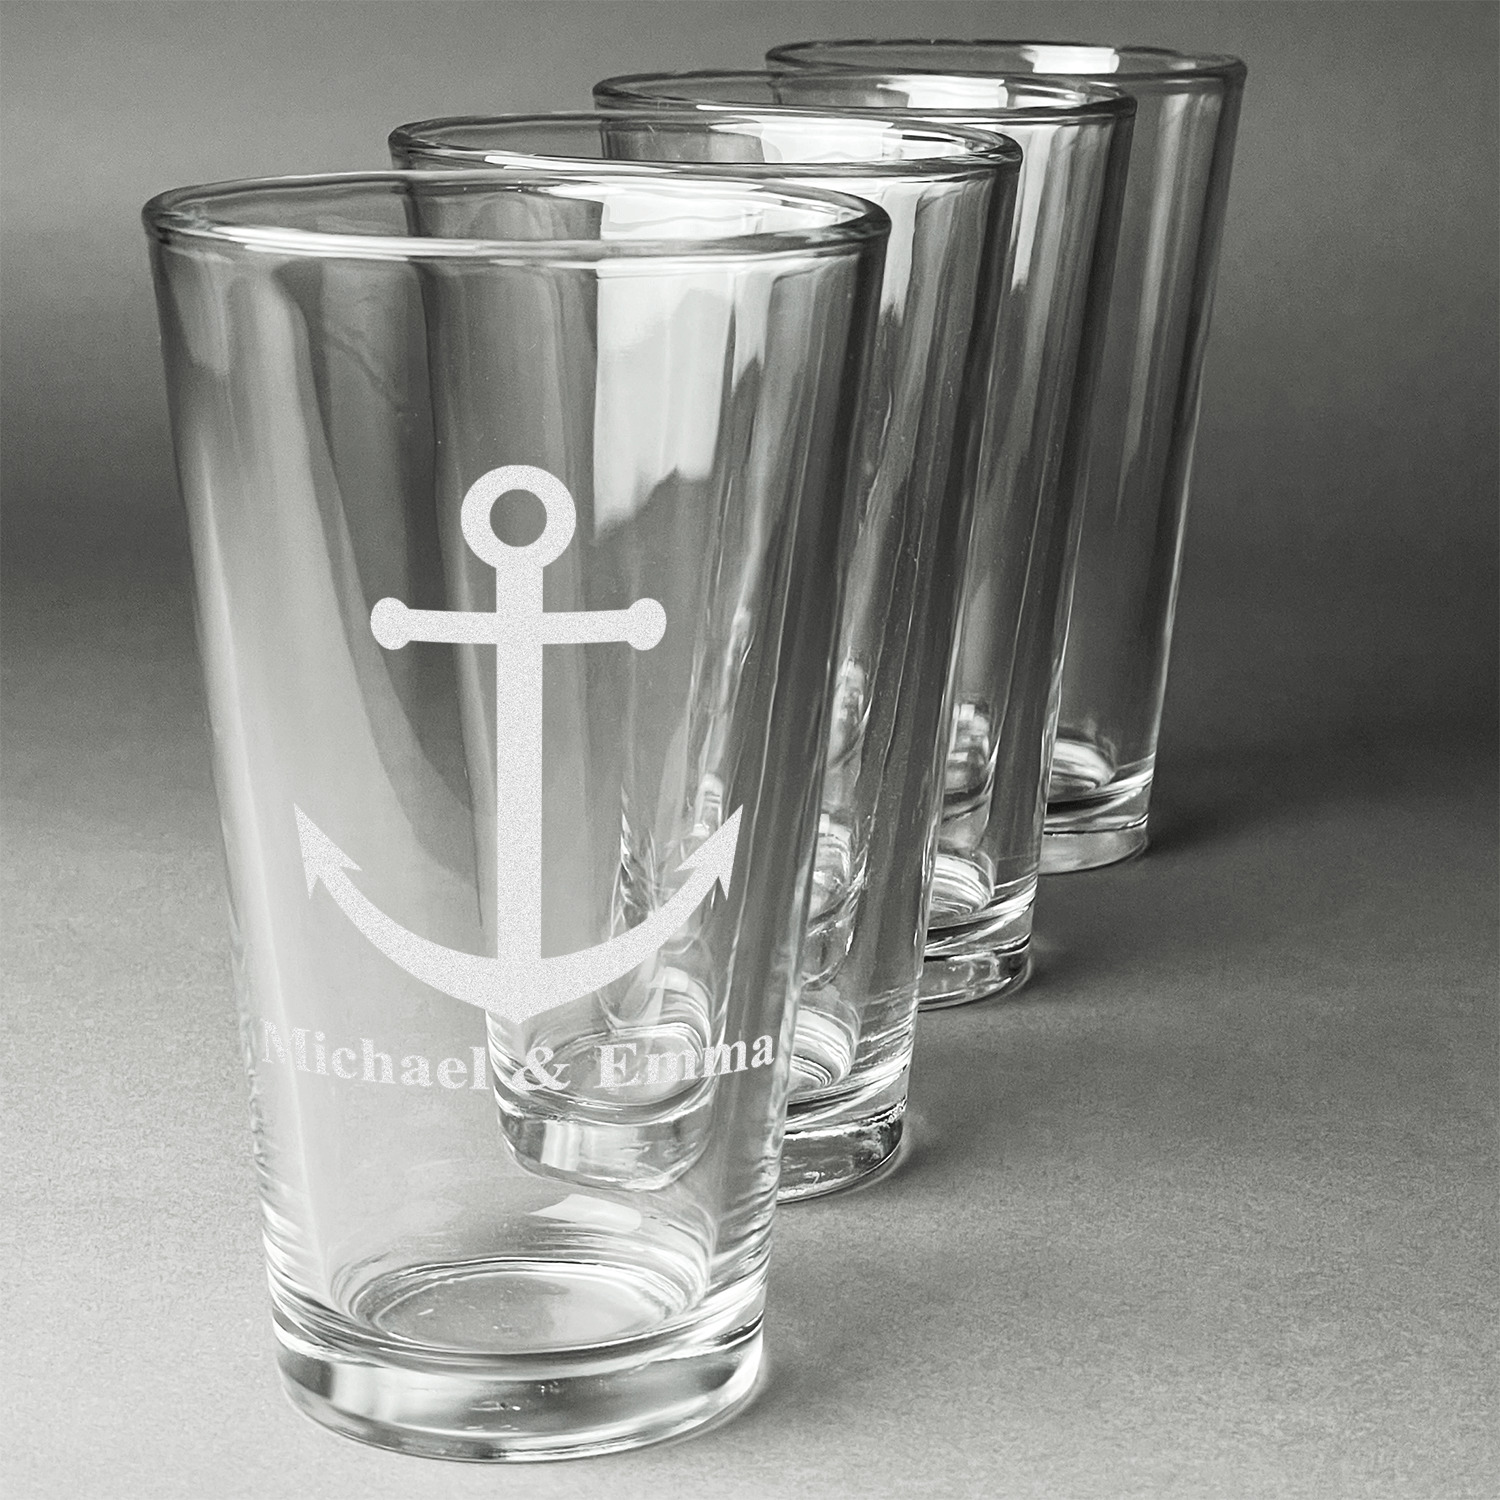 All Anchors Beer Glasses (Set of 4) (Personalized) - YouCustomizeIt